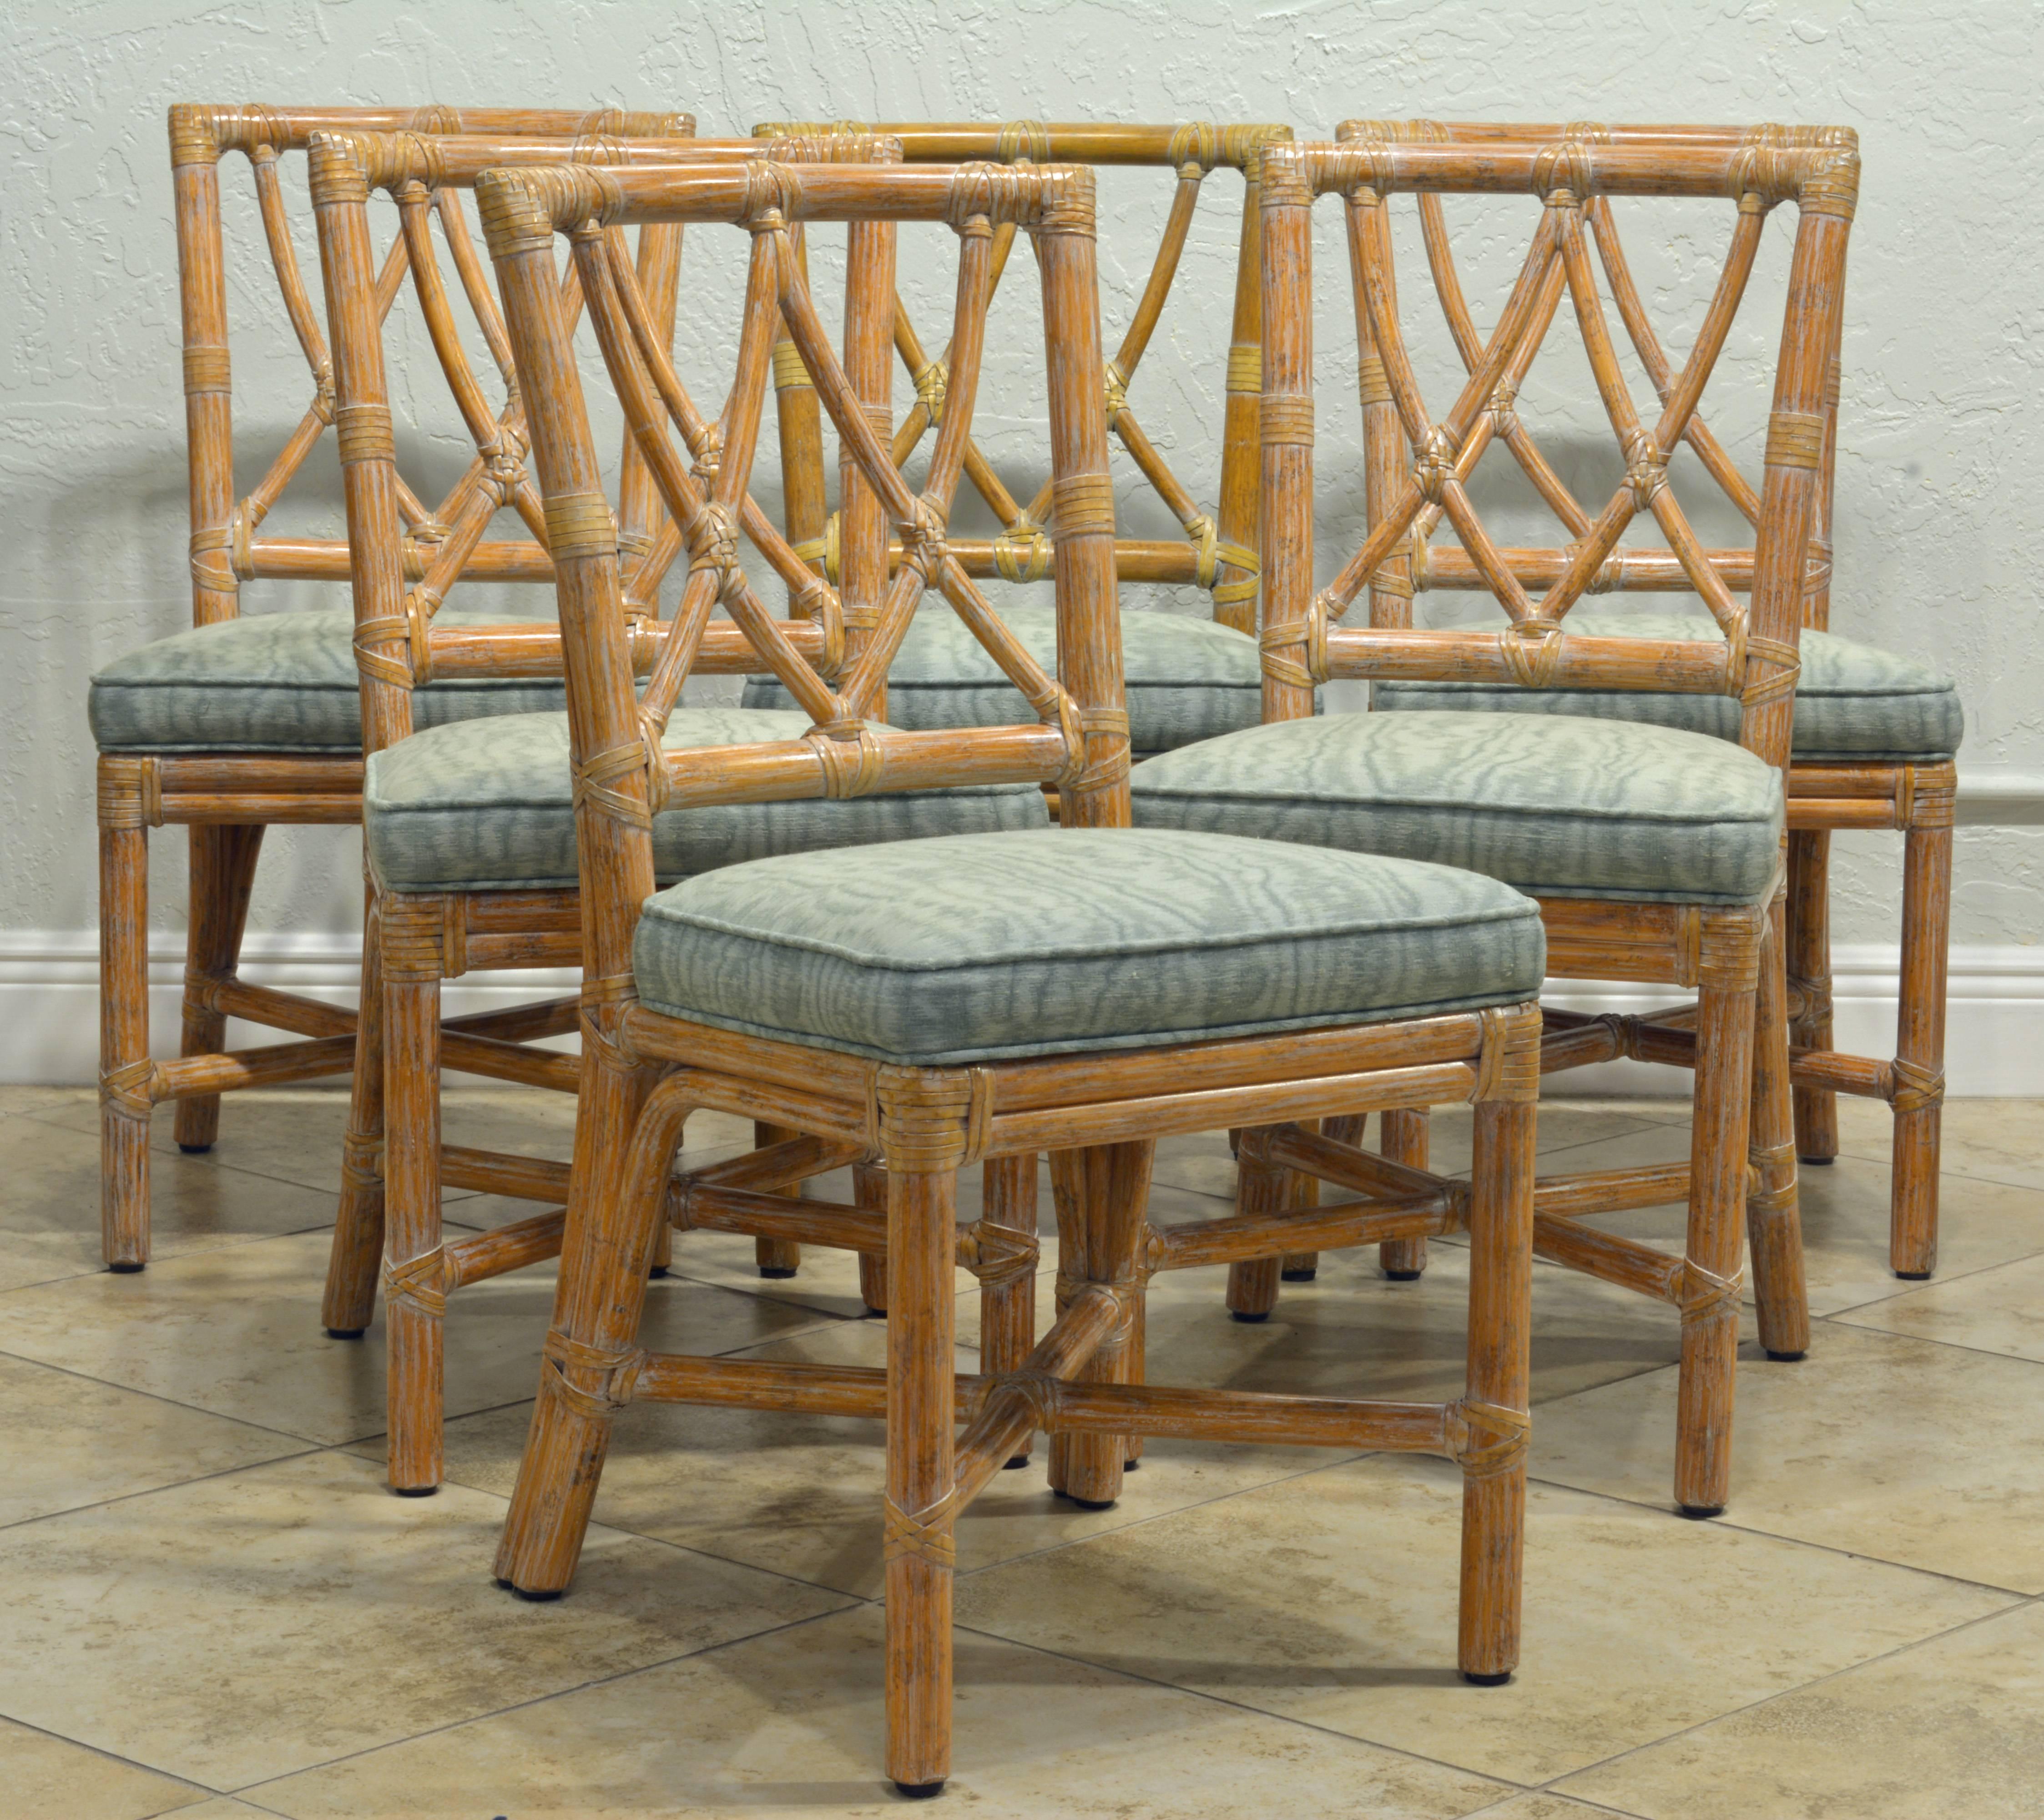 These well constructed chairs combine colonial elegance and tropical flair. The seats are beautifully upholstered and the group of chairs are in excellent condition.